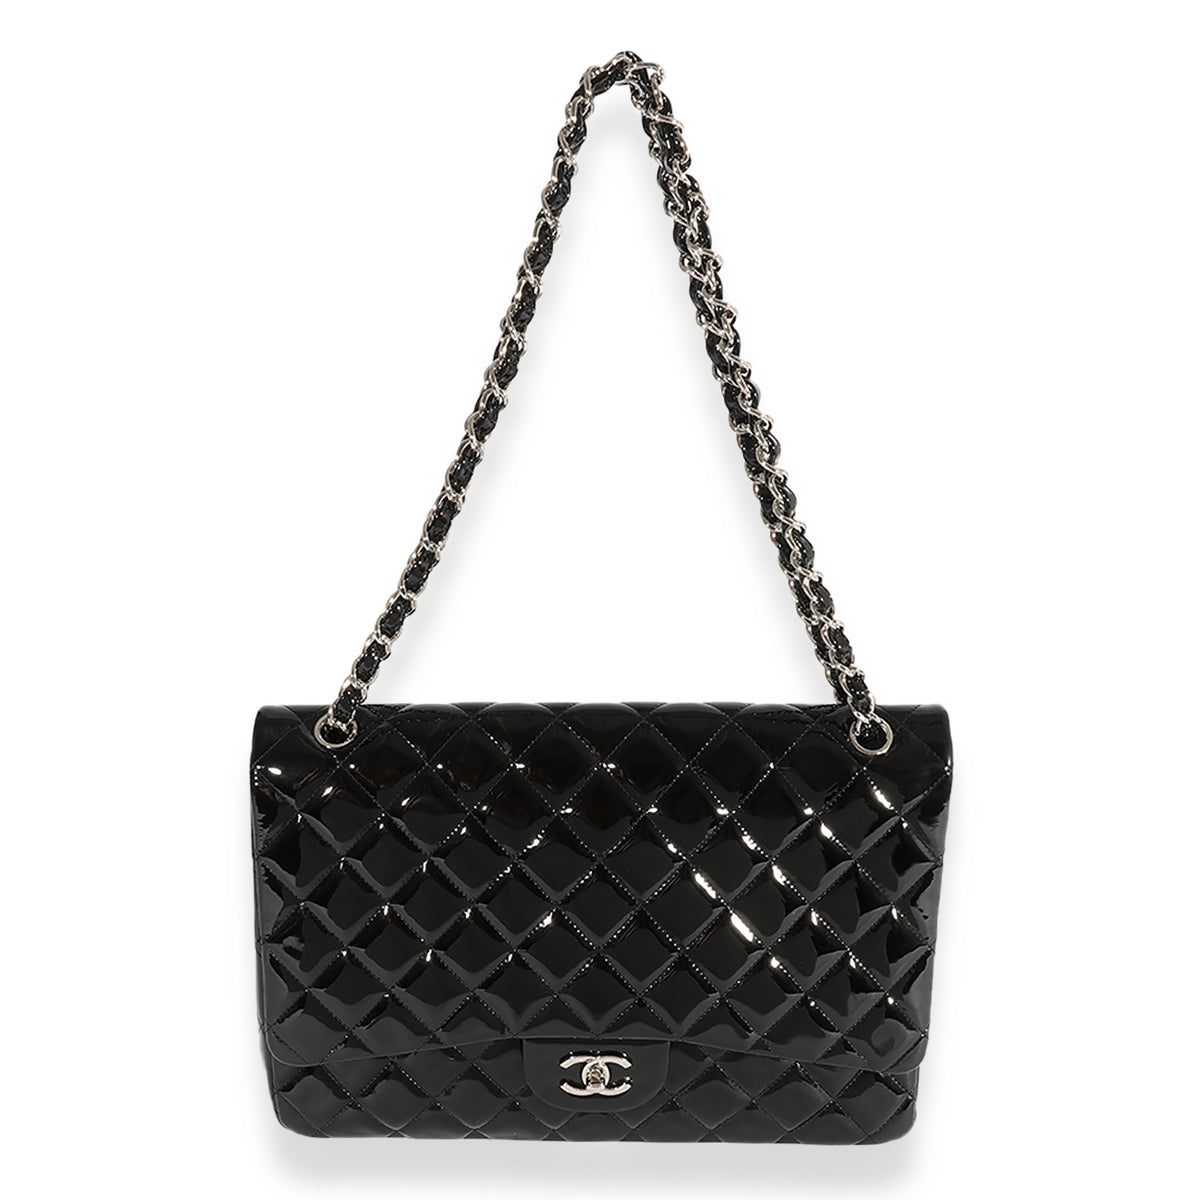 Chanel Black Quilted Patent Leather Jumbo Classic Single Flap Bag, myGemma, CH